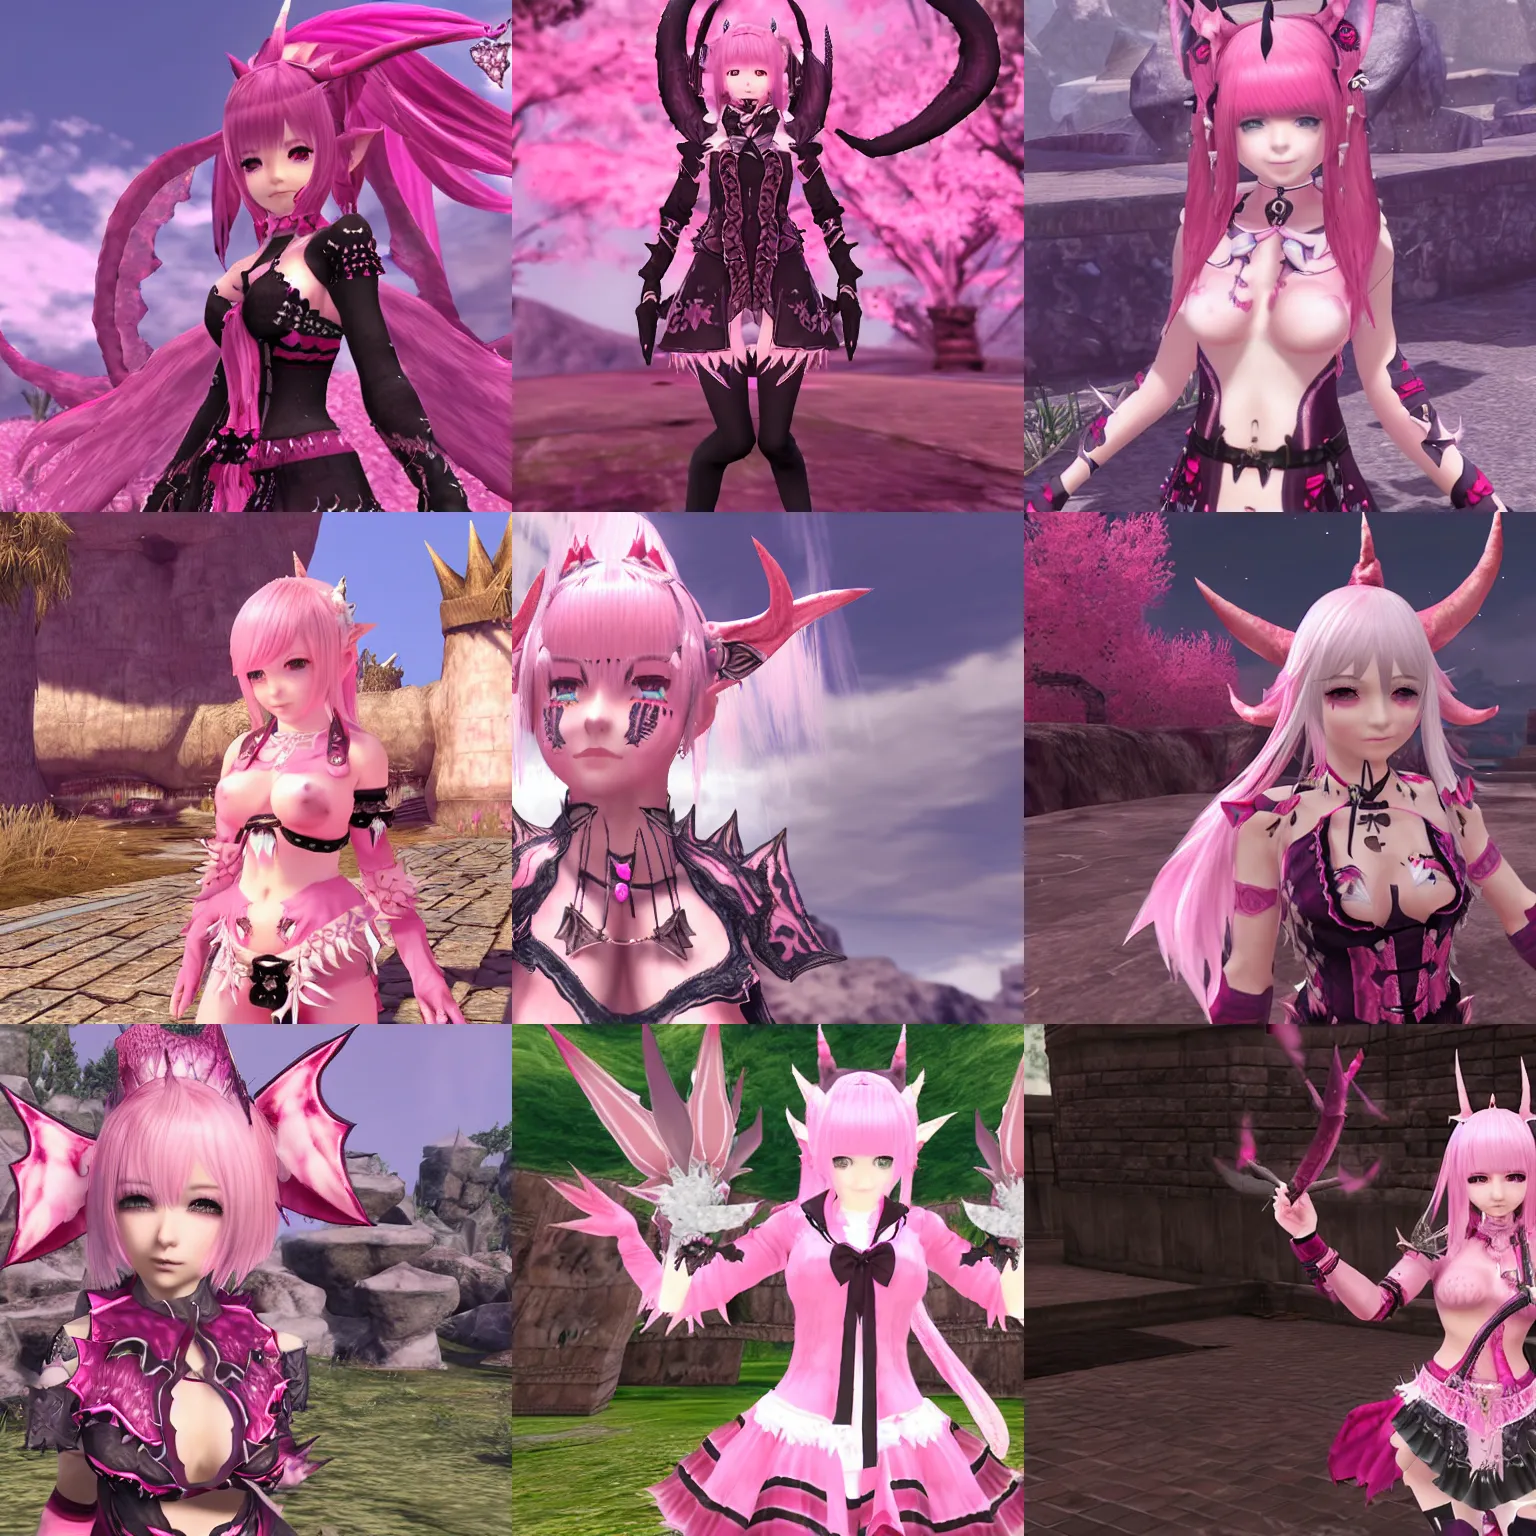 Prompt: An Au Ra woman with horns, a spiked tail, and patches of scales on her skin posing cutely, Final Fantasy XIV, pink clothing, ingame screenshot, friendly